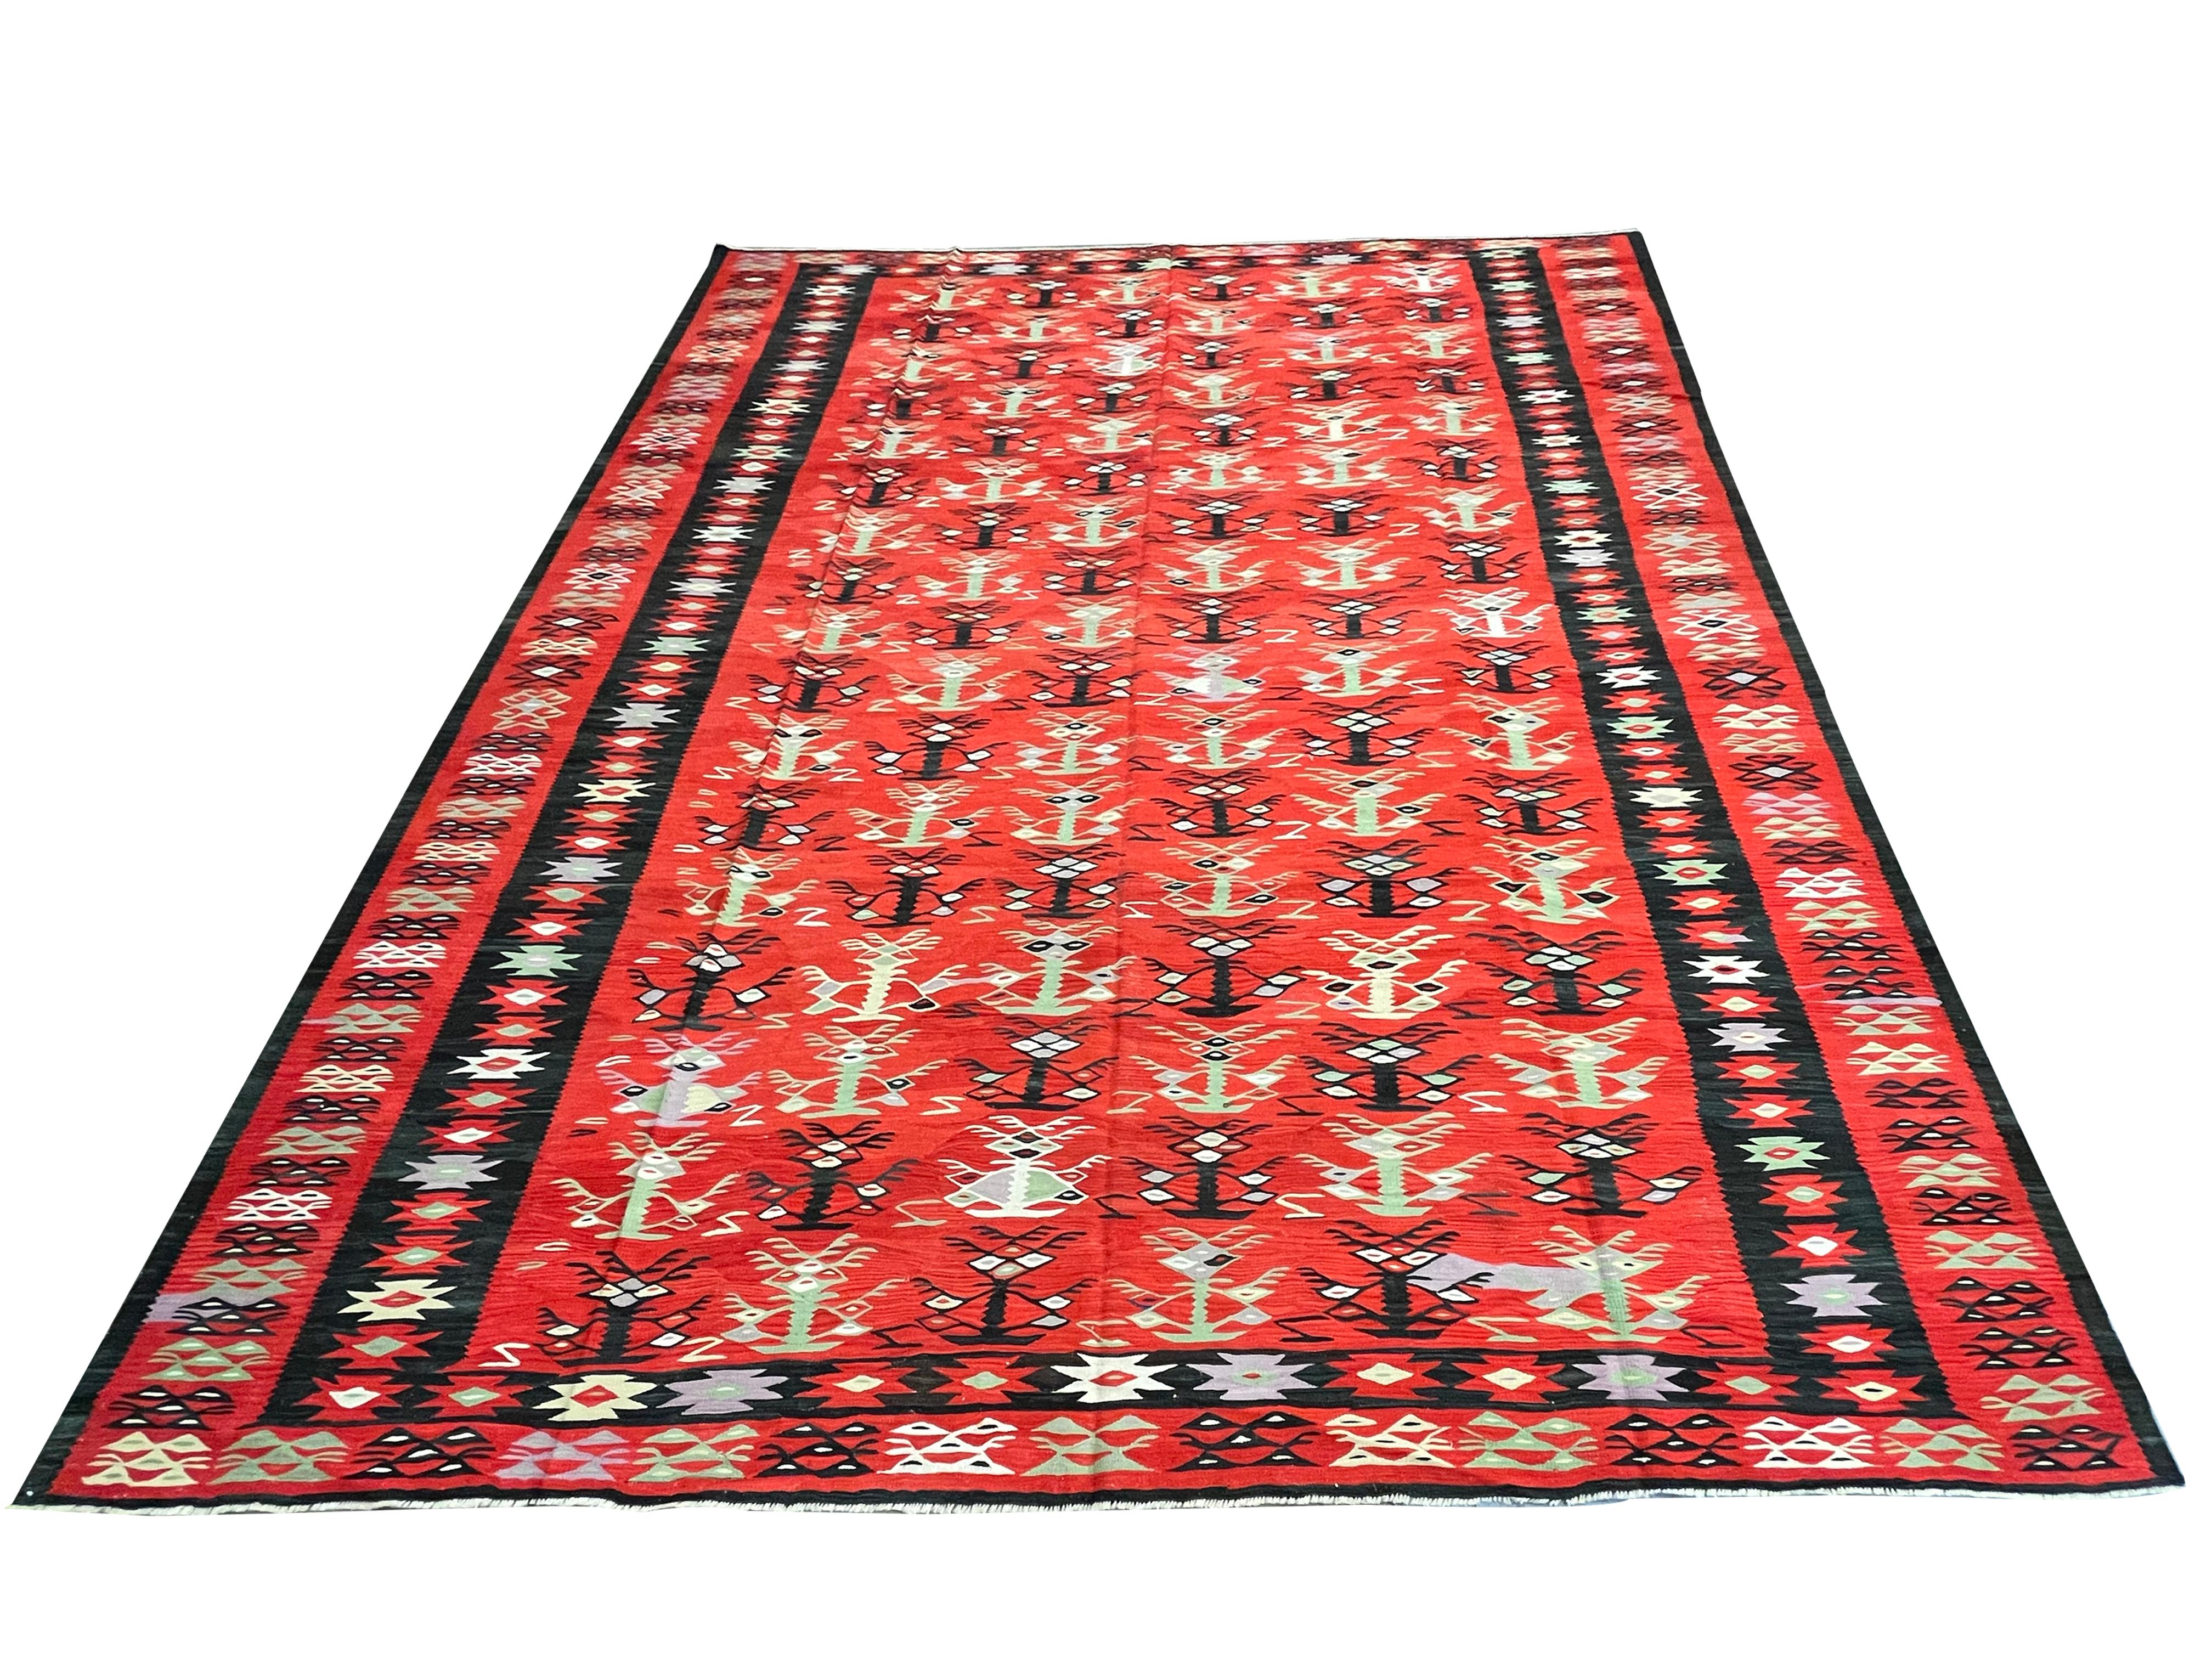 This bold red kilim is a traditional flatwoven area rug woven by hand circa 1900. The design features a geometric design woven in bold black, green, and blue accents on a beautiful red background. The stripe design is eyecatching, so this piece is